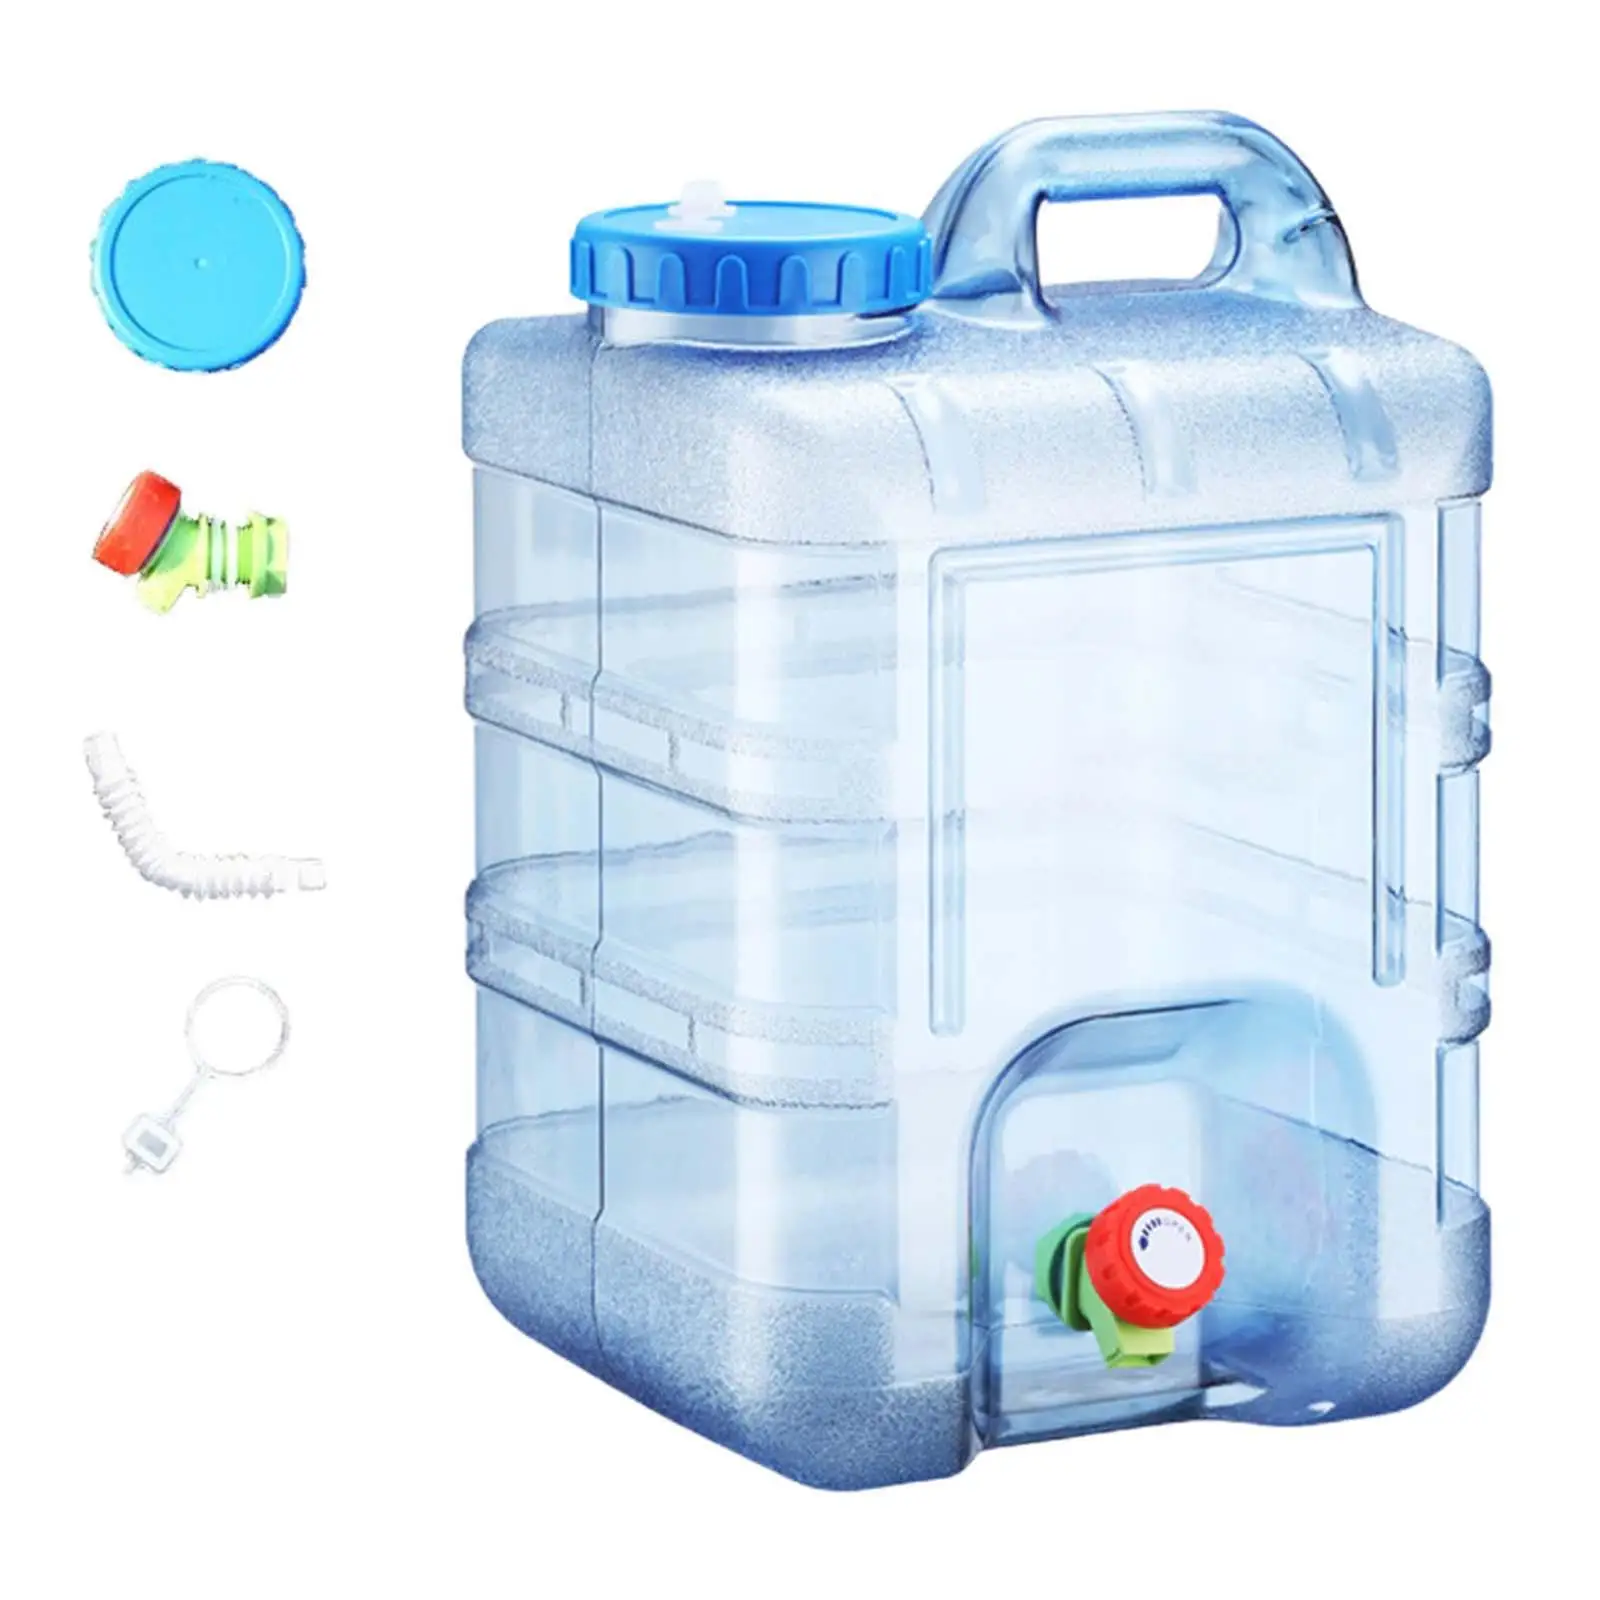 Portable Water Tank Water Storage Container Space Saving Versatile Lightweight Water Barrel for Picnic, Hiking, Family Travel